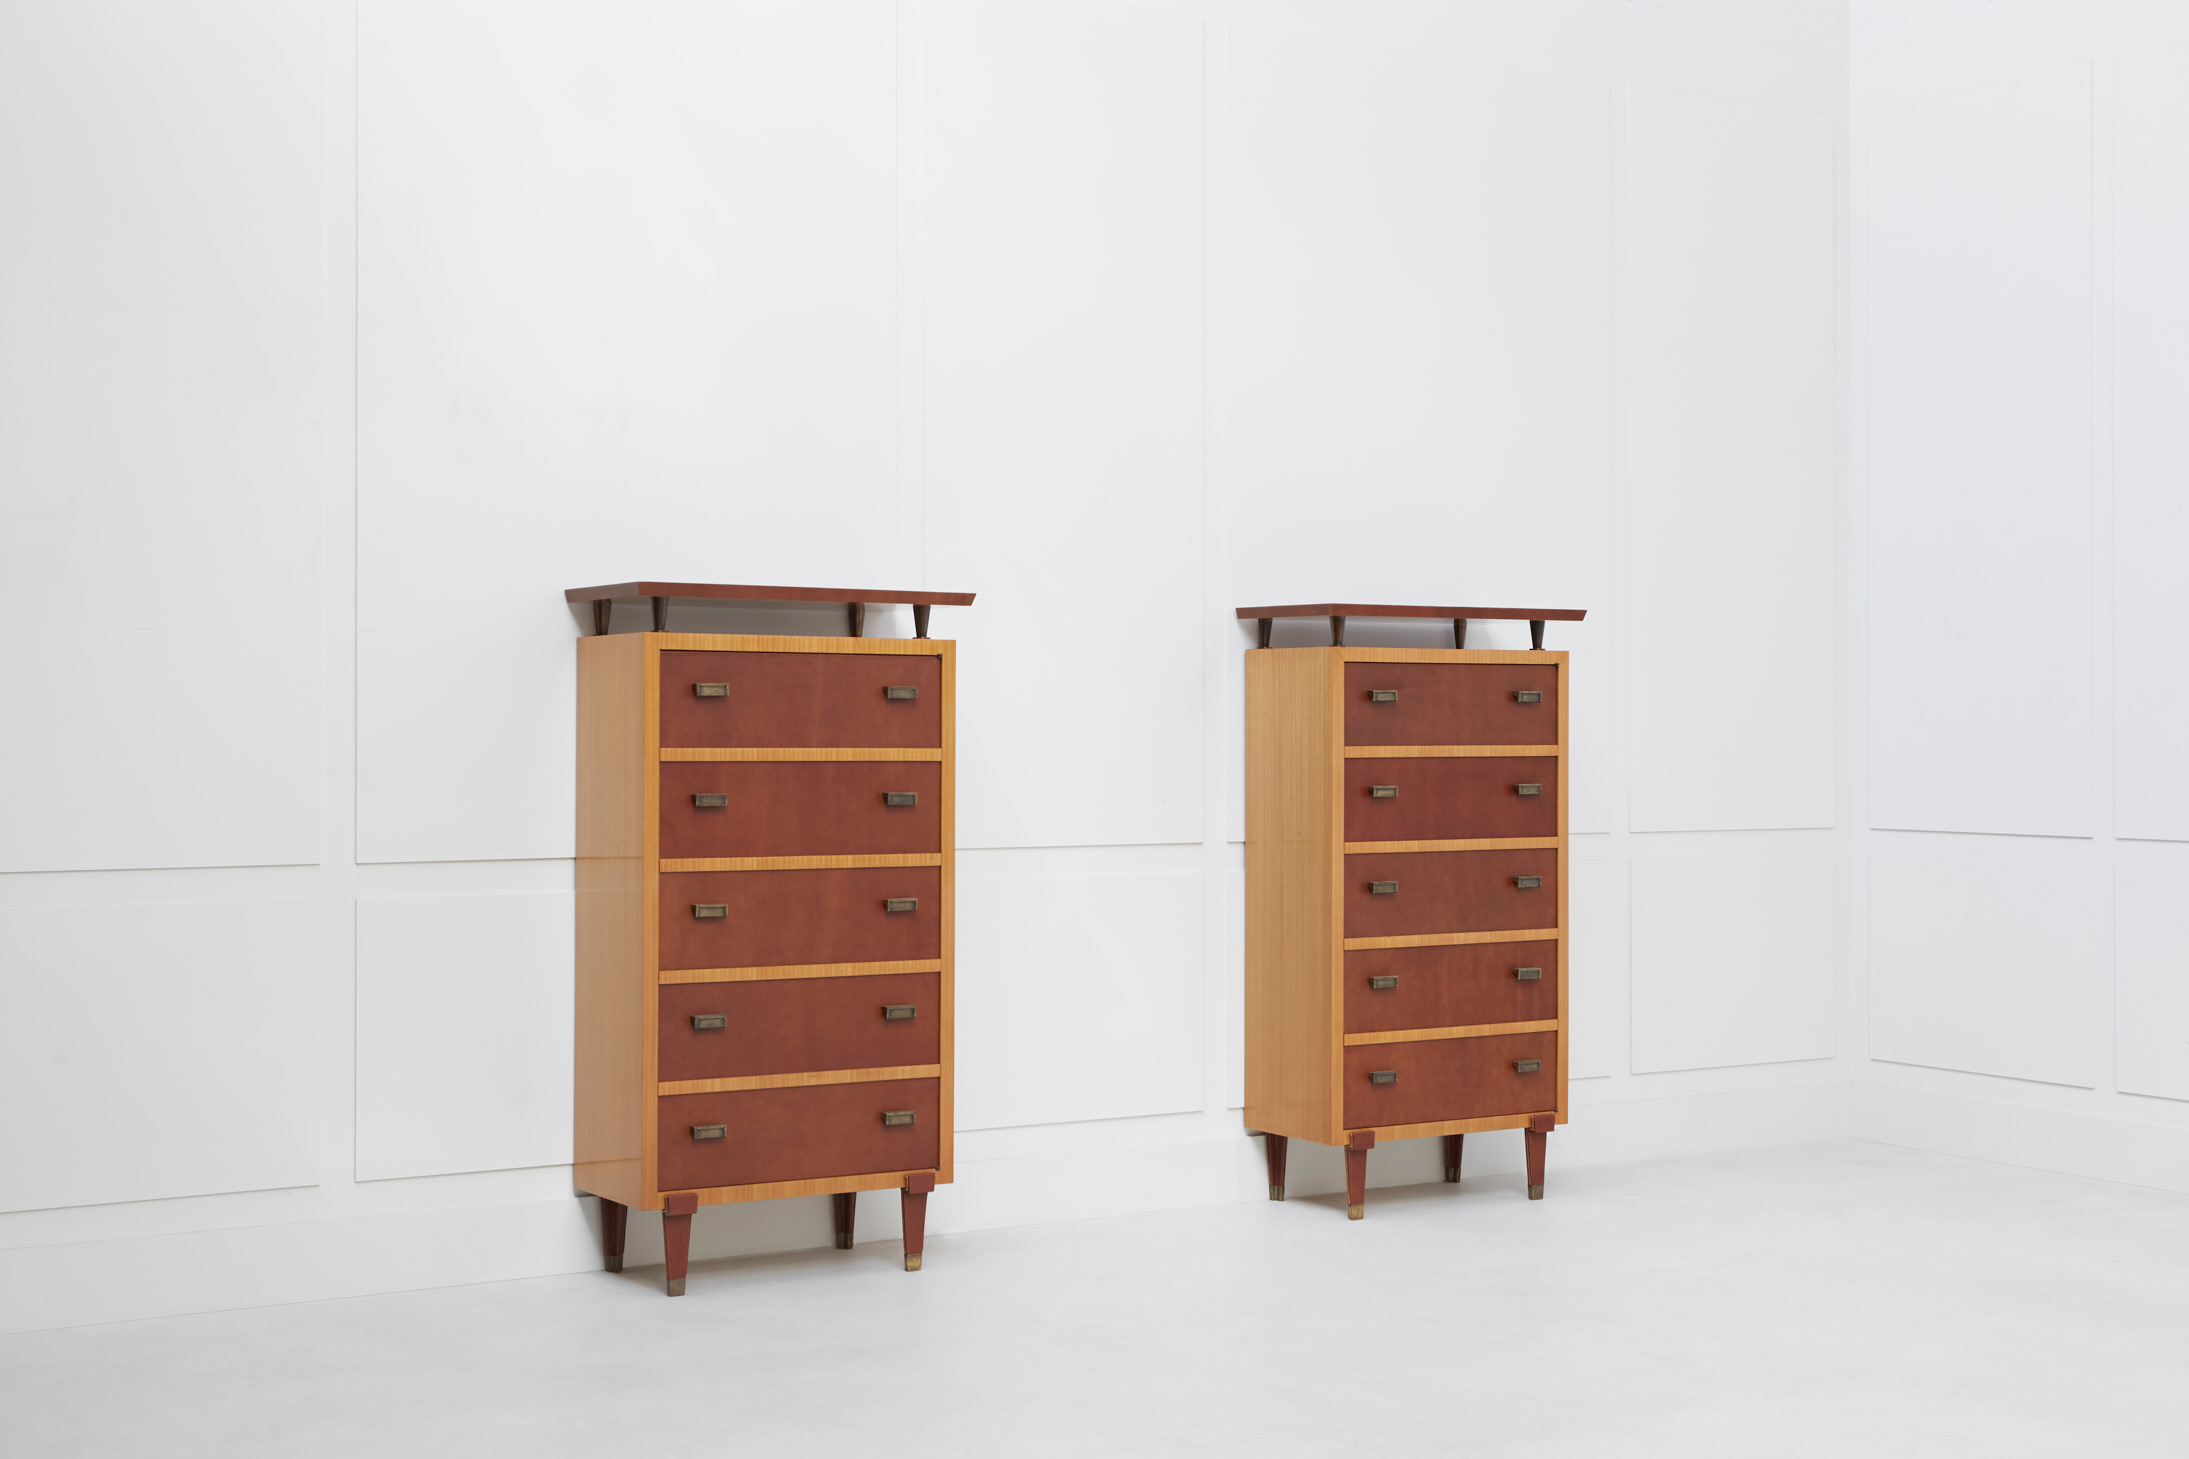 Jacques Quinet, Pair of chests, vue 03